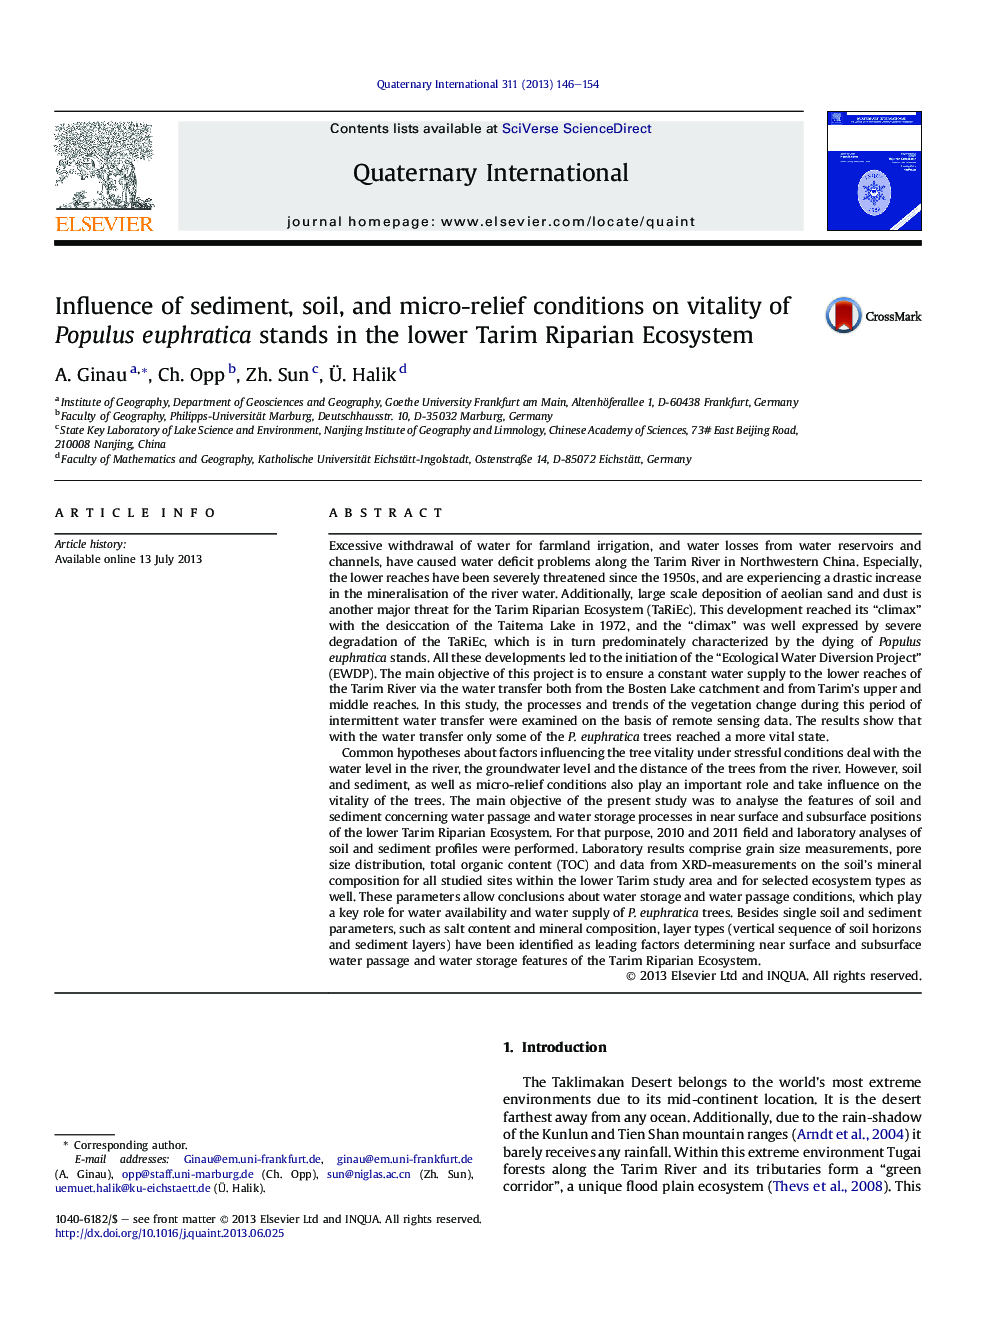 Influence of sediment, soil, and micro-relief conditions on vitality of Populus euphratica stands in the lower Tarim Riparian Ecosystem